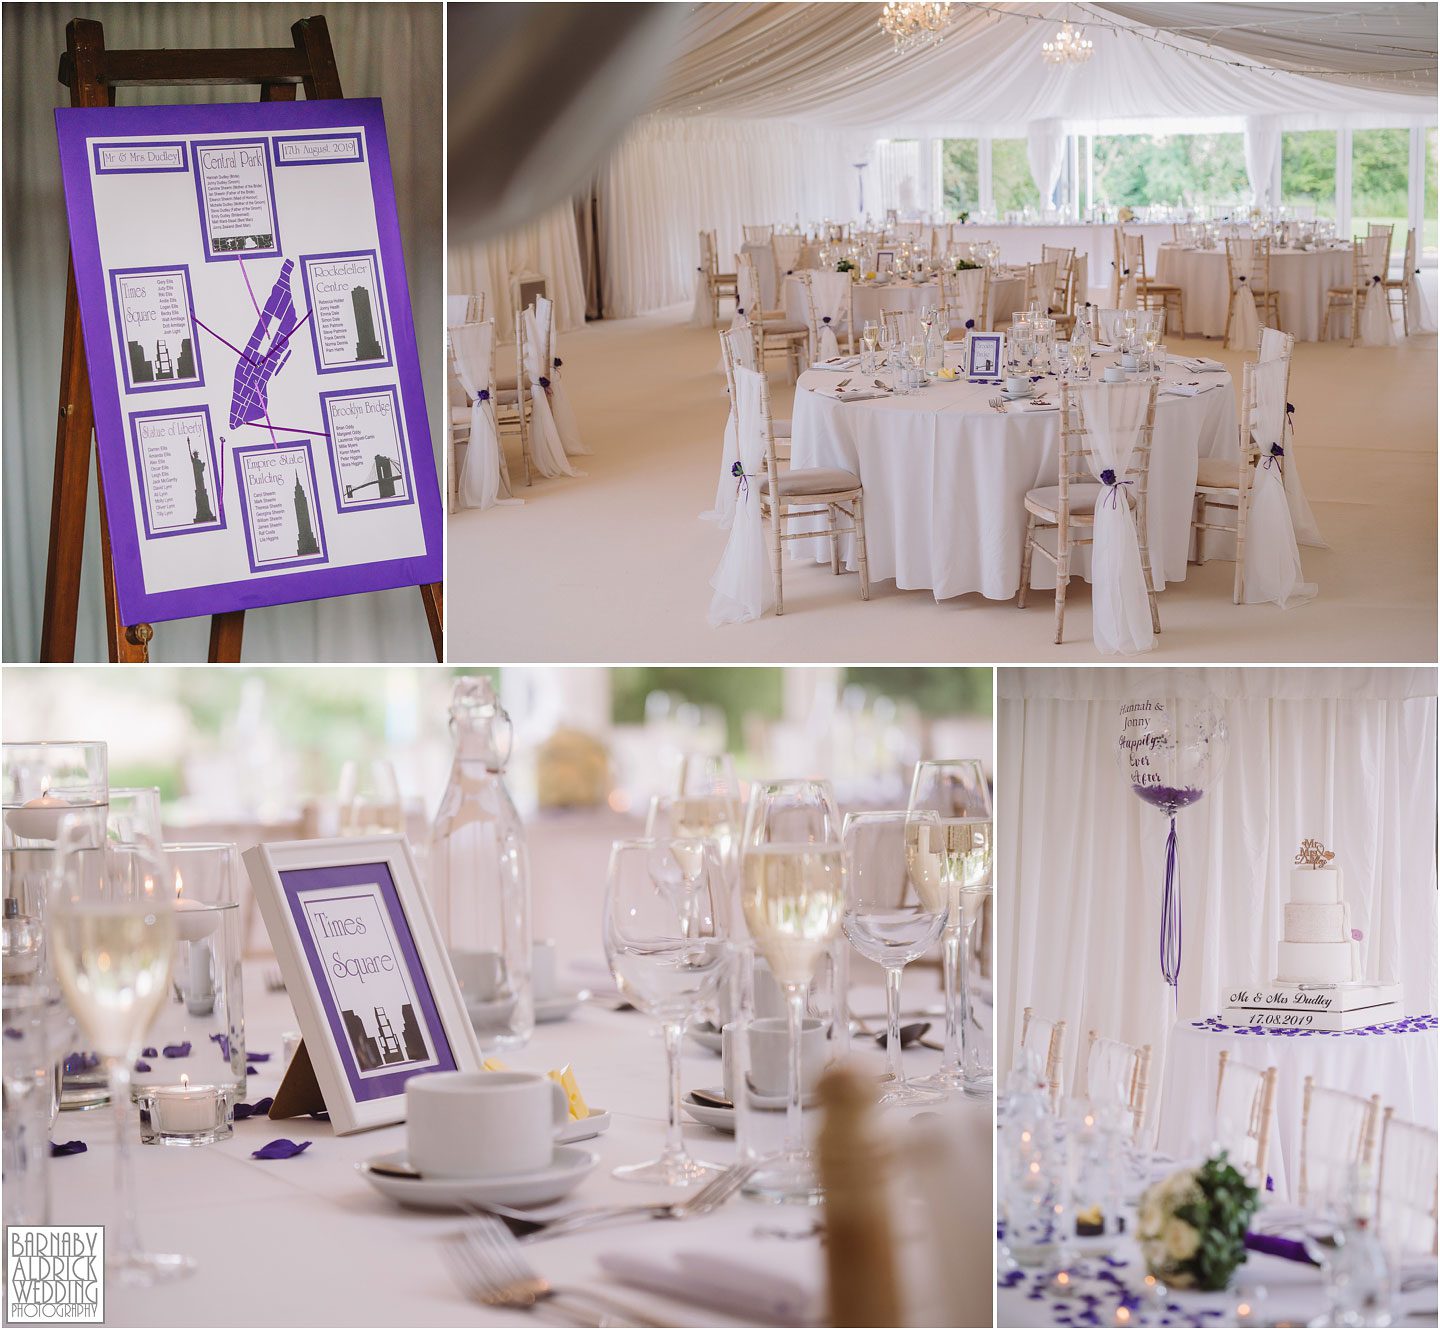 Priory Cottages Wedding Marquee, Meal space at Priory Cottages Yorkshire, Bright white wedding marquee, Wedding breakfast ideas